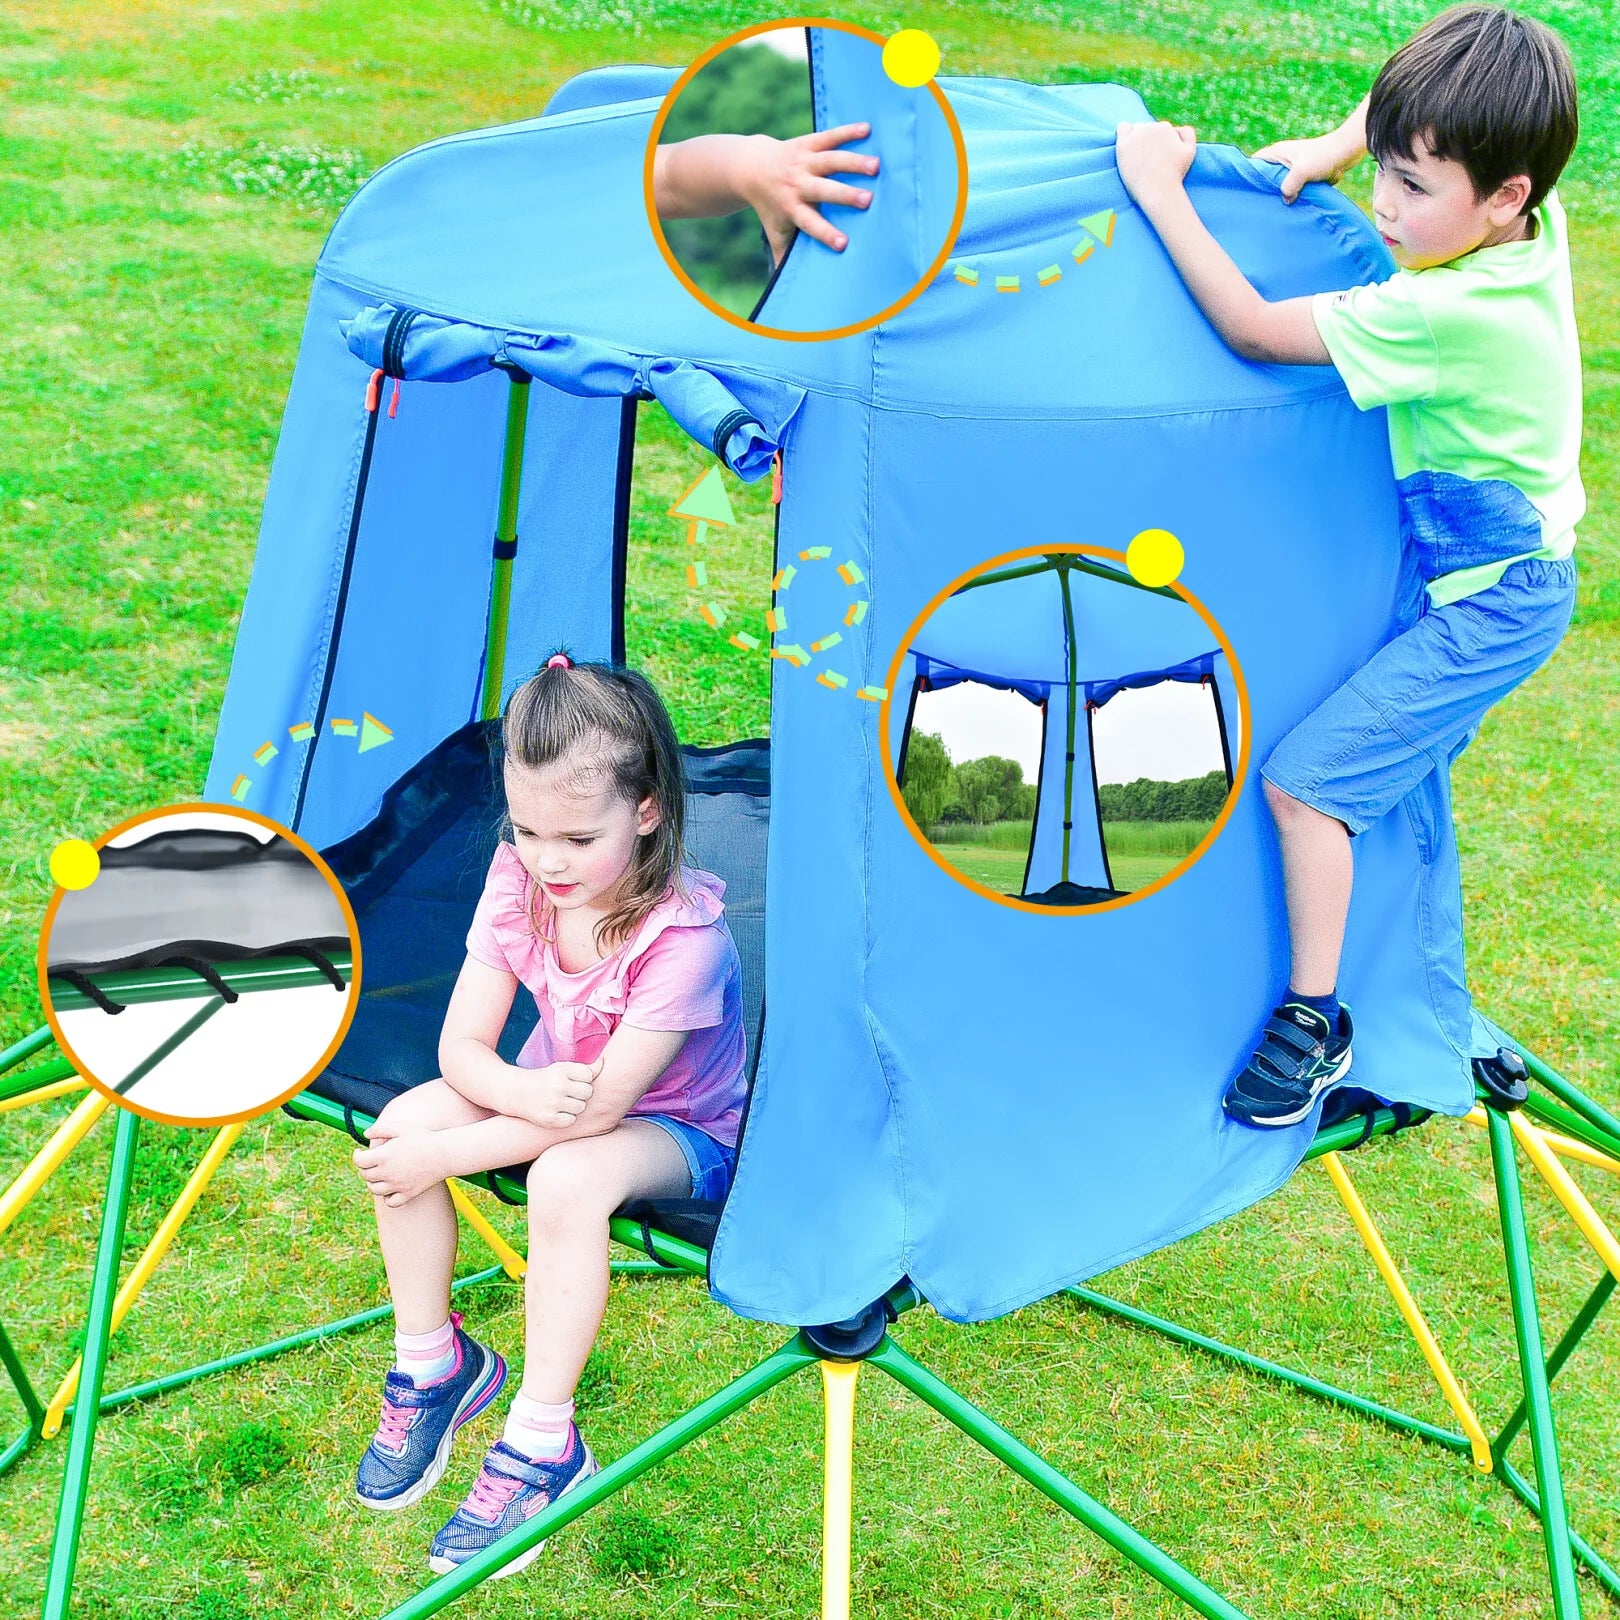 10 ft Climbing Dome with Play Tent,Outdoor Jungle Gym Geometric,Playground Dome Climber Play Center for Kids,UV Resistant Steel Supporting 1000 LBS